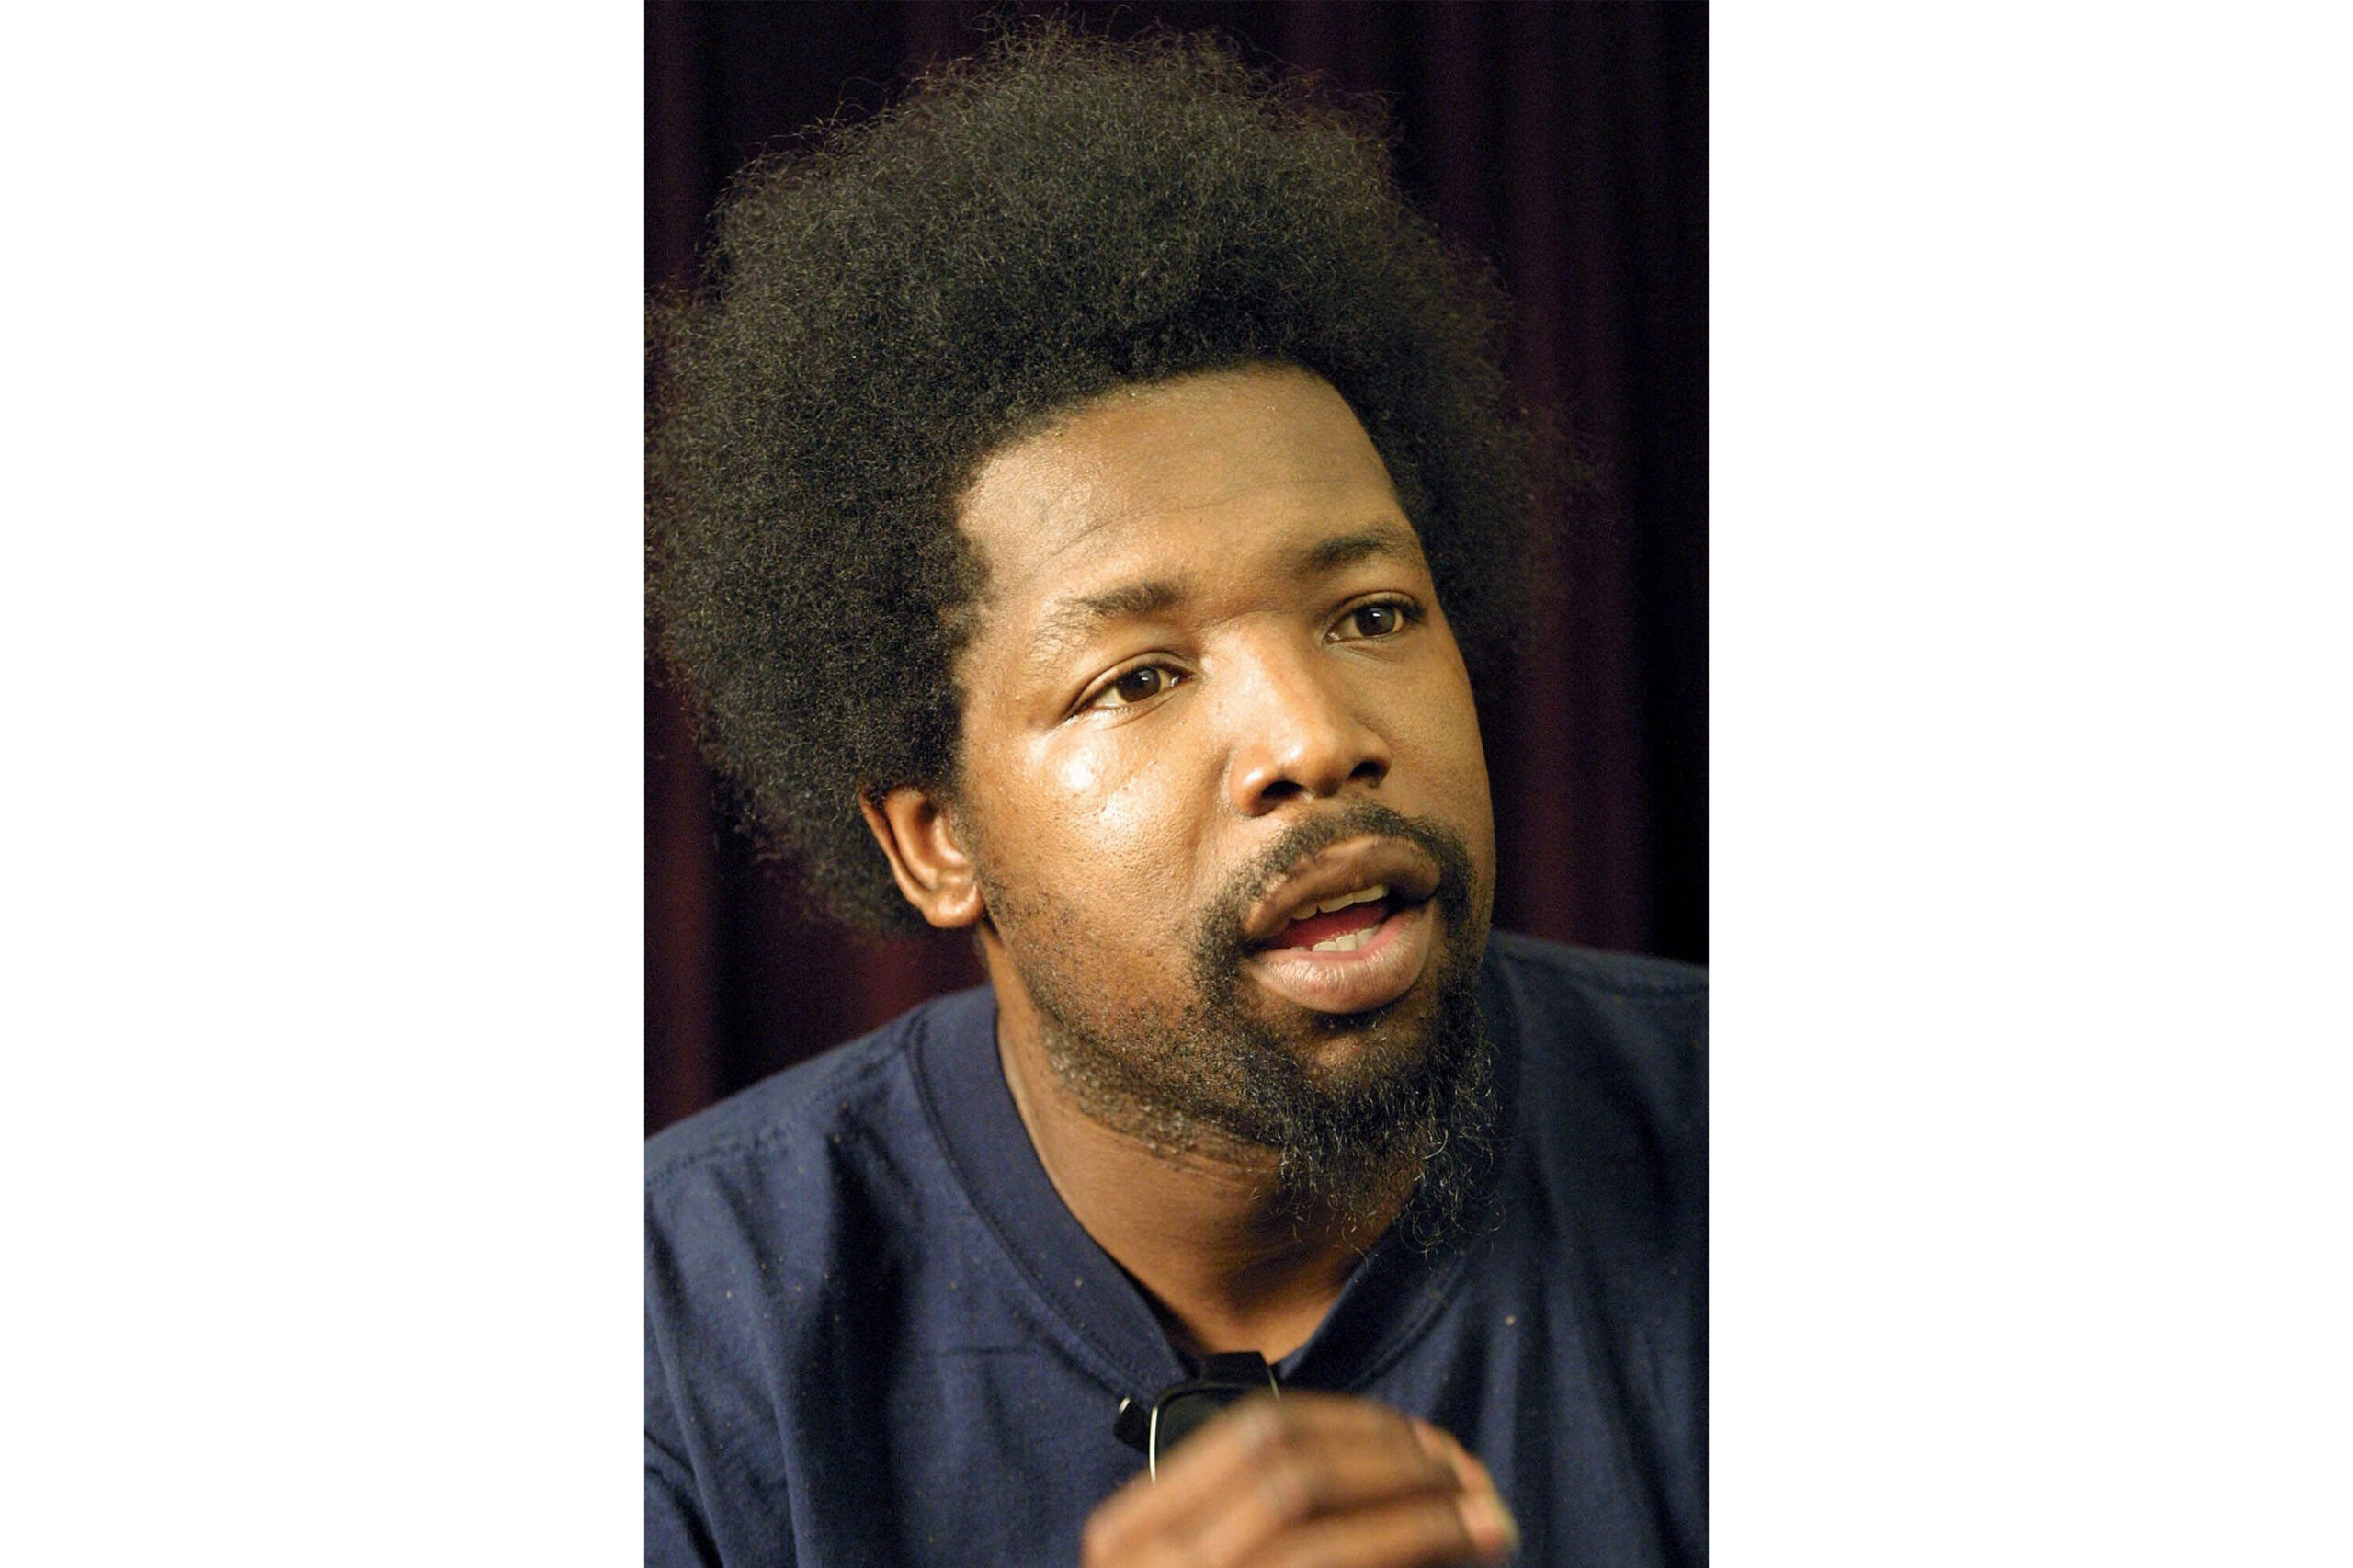 FILE - Afroman, whose real name is Joseph Foreman, poses for a portrait in New York, Aug. 22, 2001....